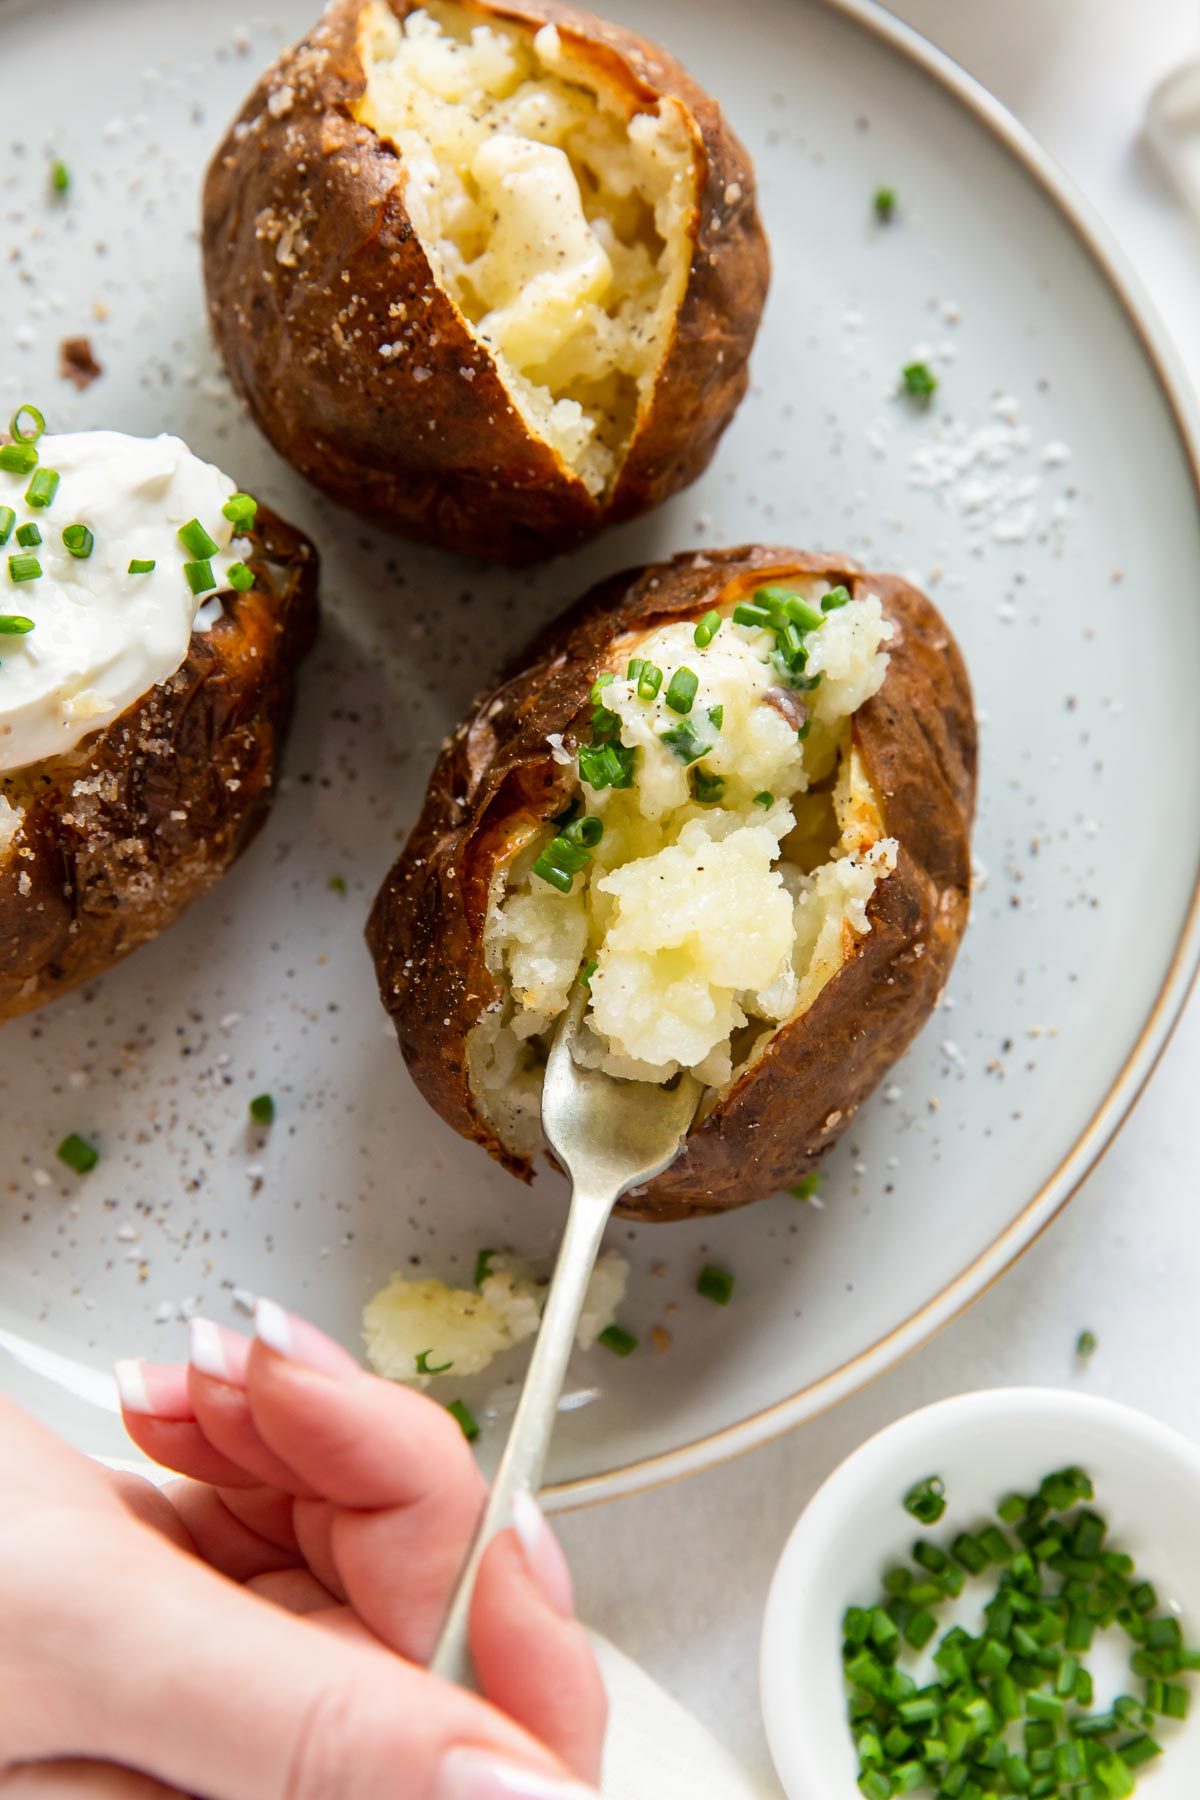 Taking a bite of baked potato with a fork.